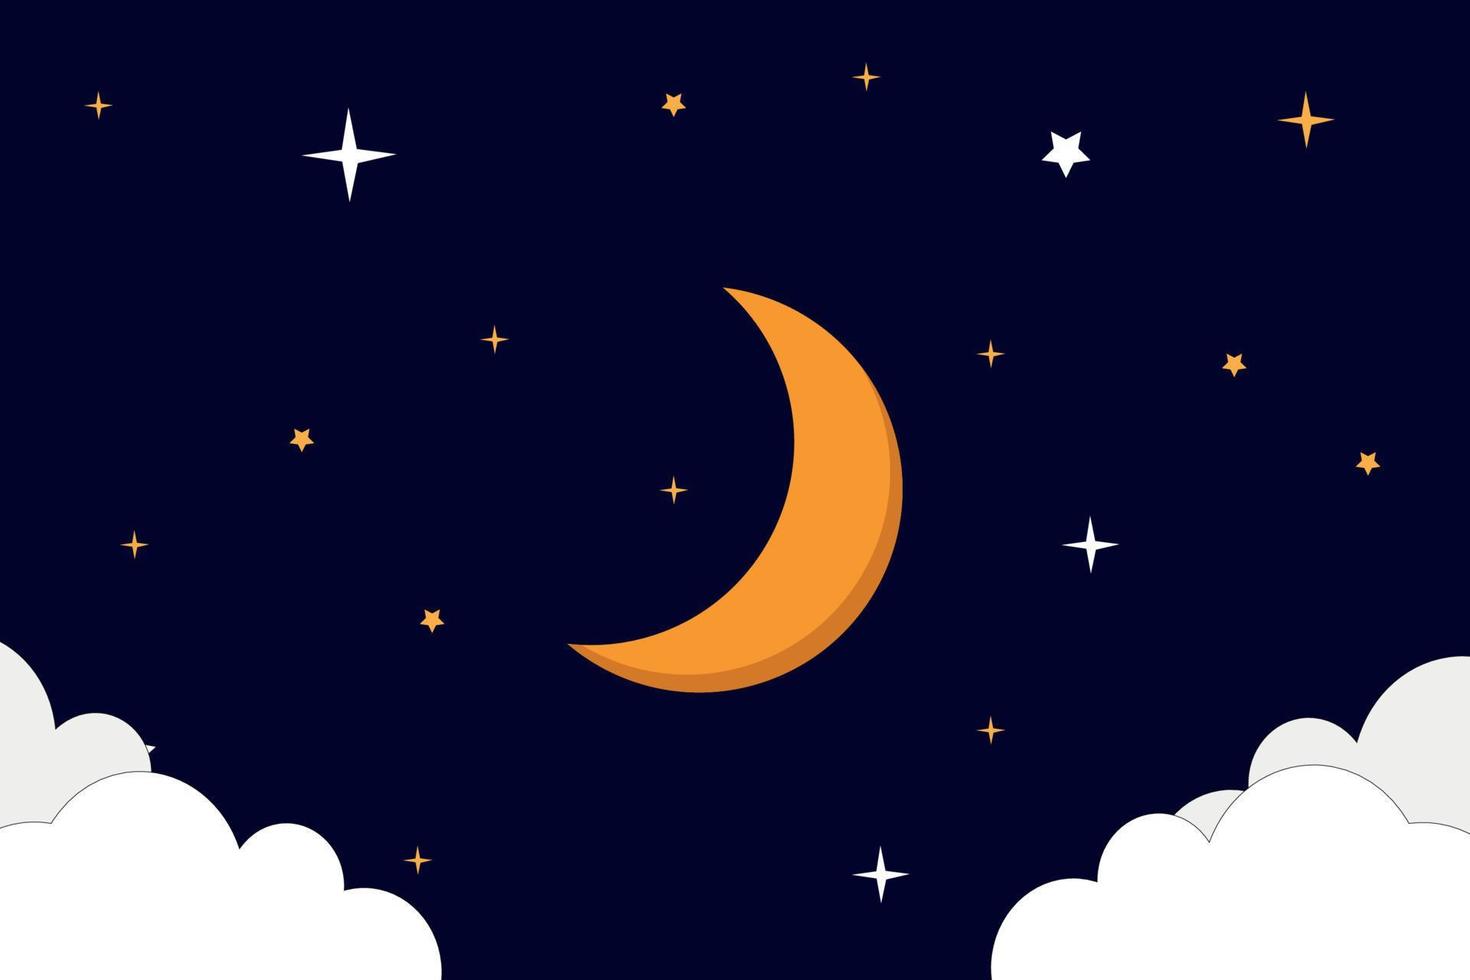 Vector night sky background stars and moon. crescent moon with clouds and stars in space